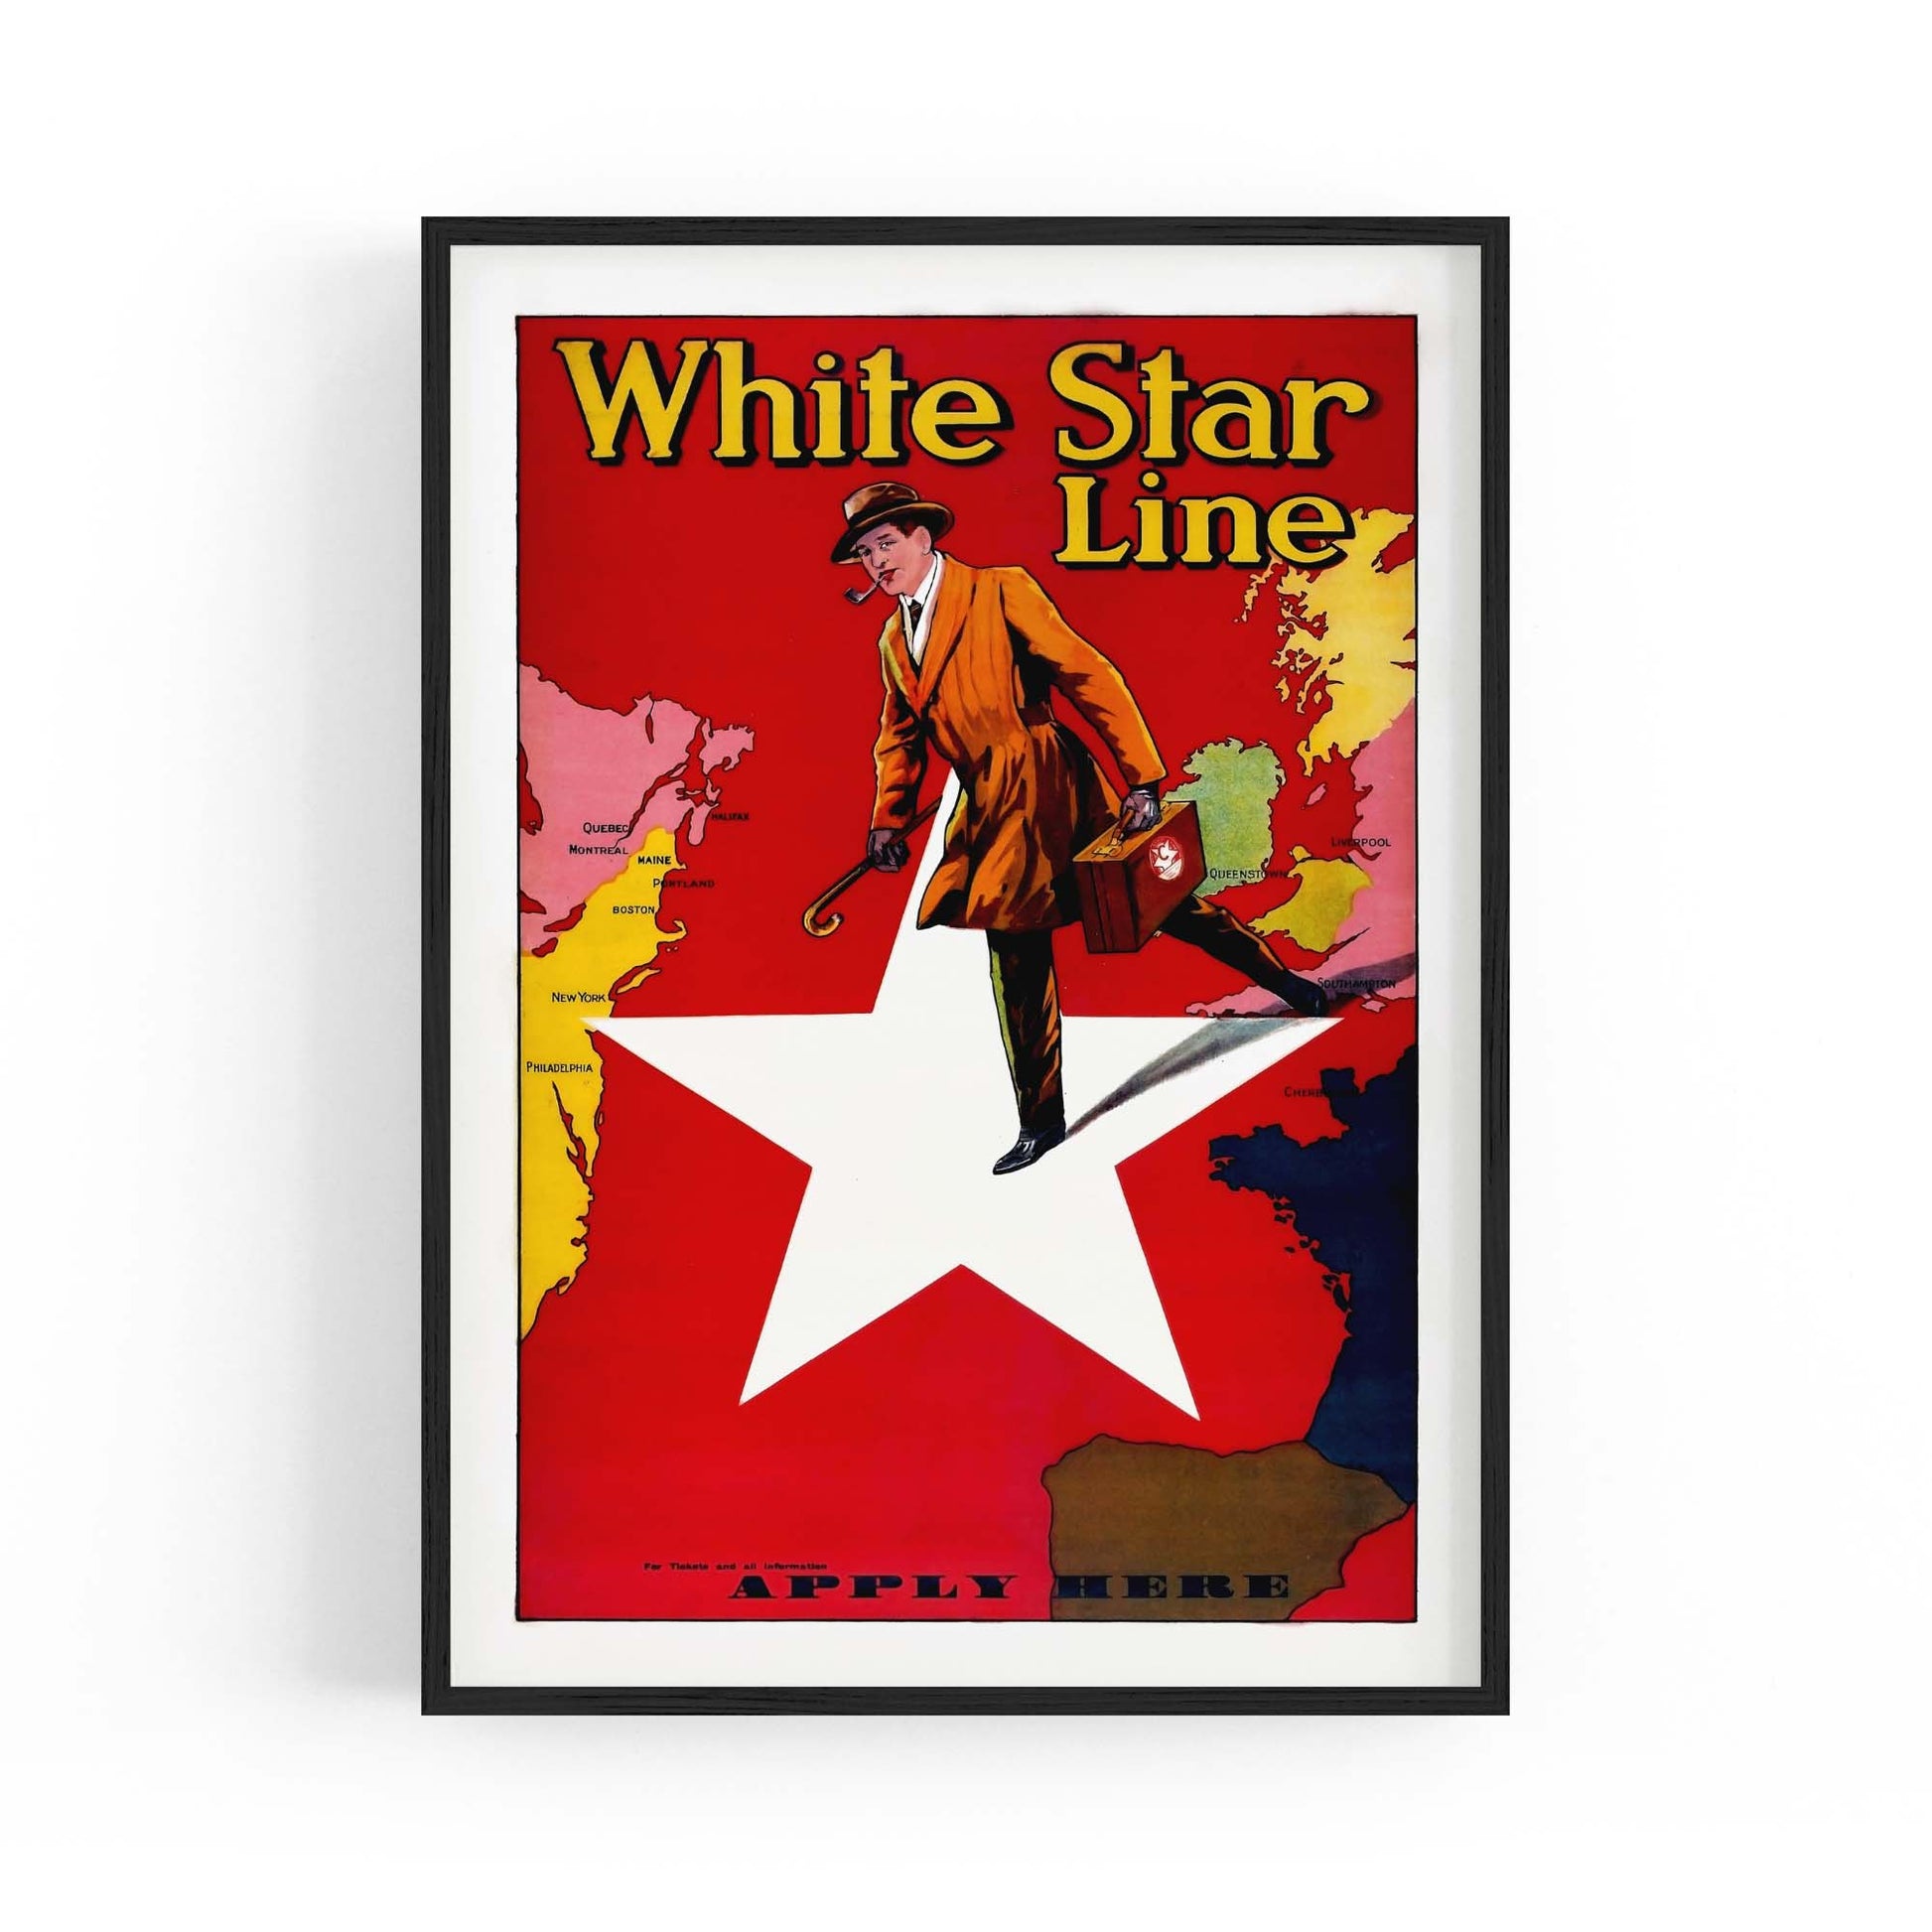 White Star Line Vintage Shipping Advert Wall Art #4 - The Affordable Art Company